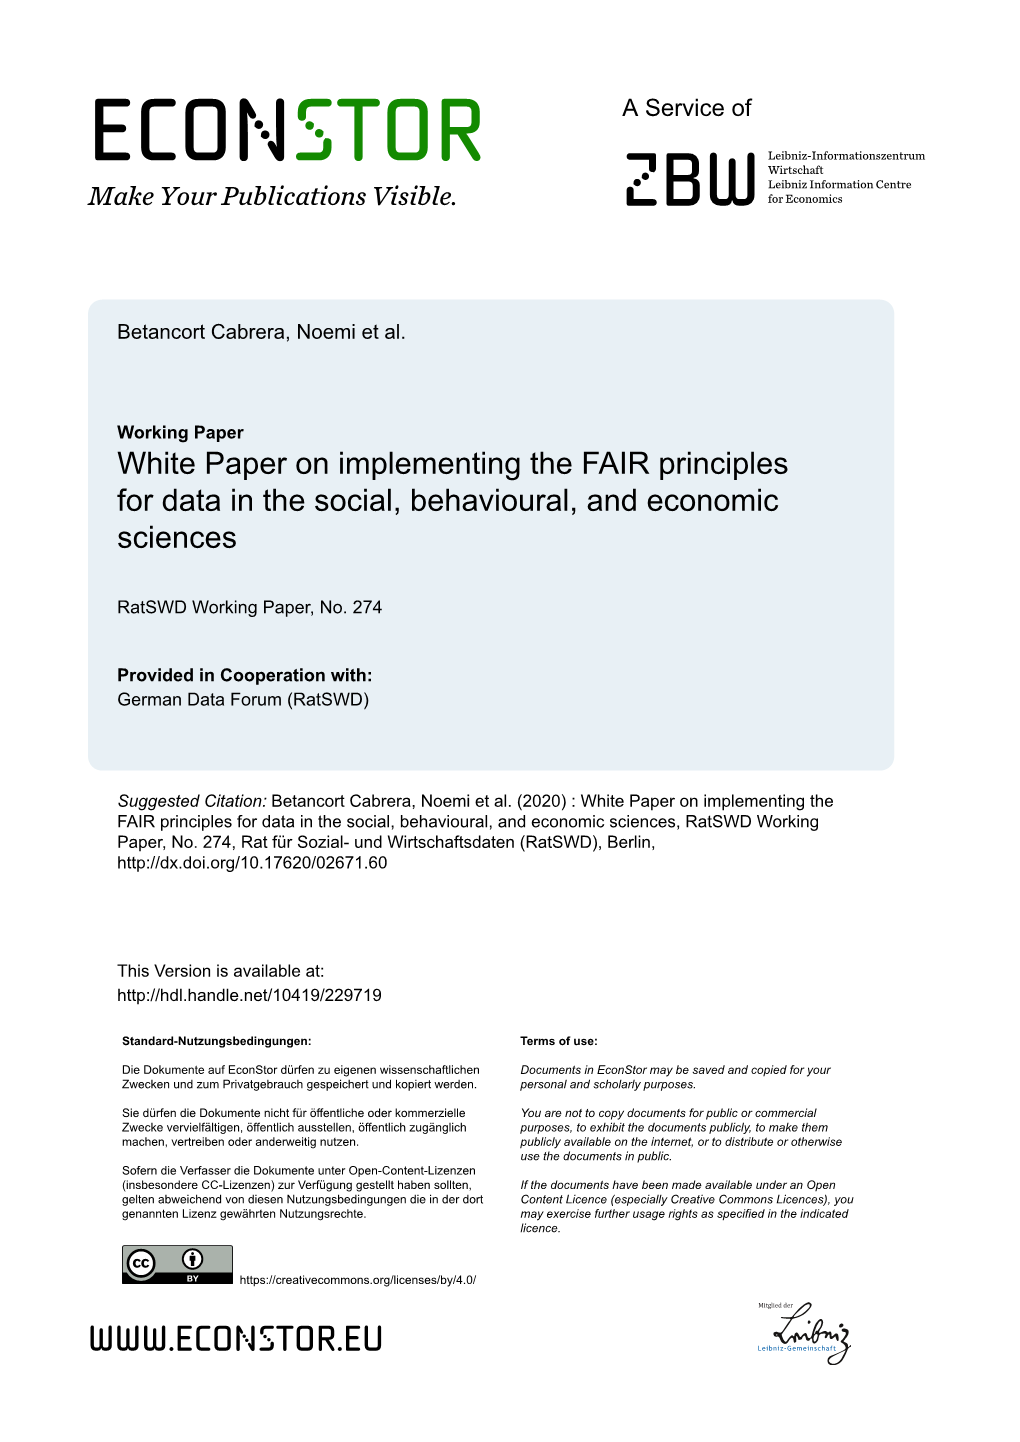 White Paper on Implementing the FAIR Principles for Data in the Social, Behavioural, and Economic Sciences